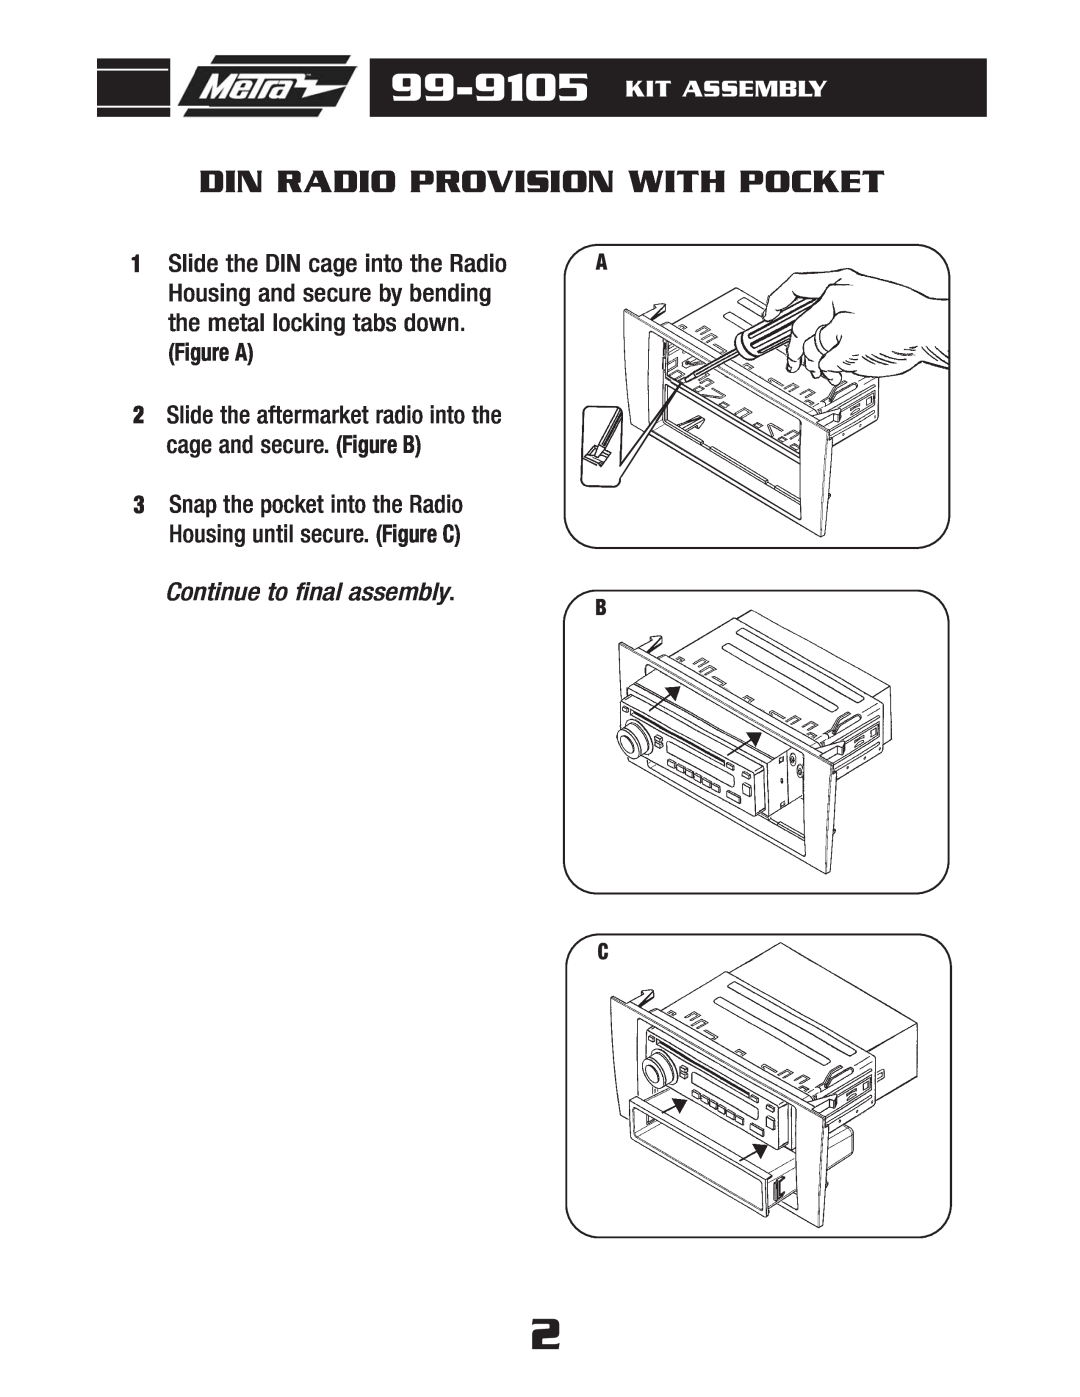 Metra Electronics 99-9105 Din Radio Provision With Pocket, Kit Assembly, Figure A, Continue to final assembly 